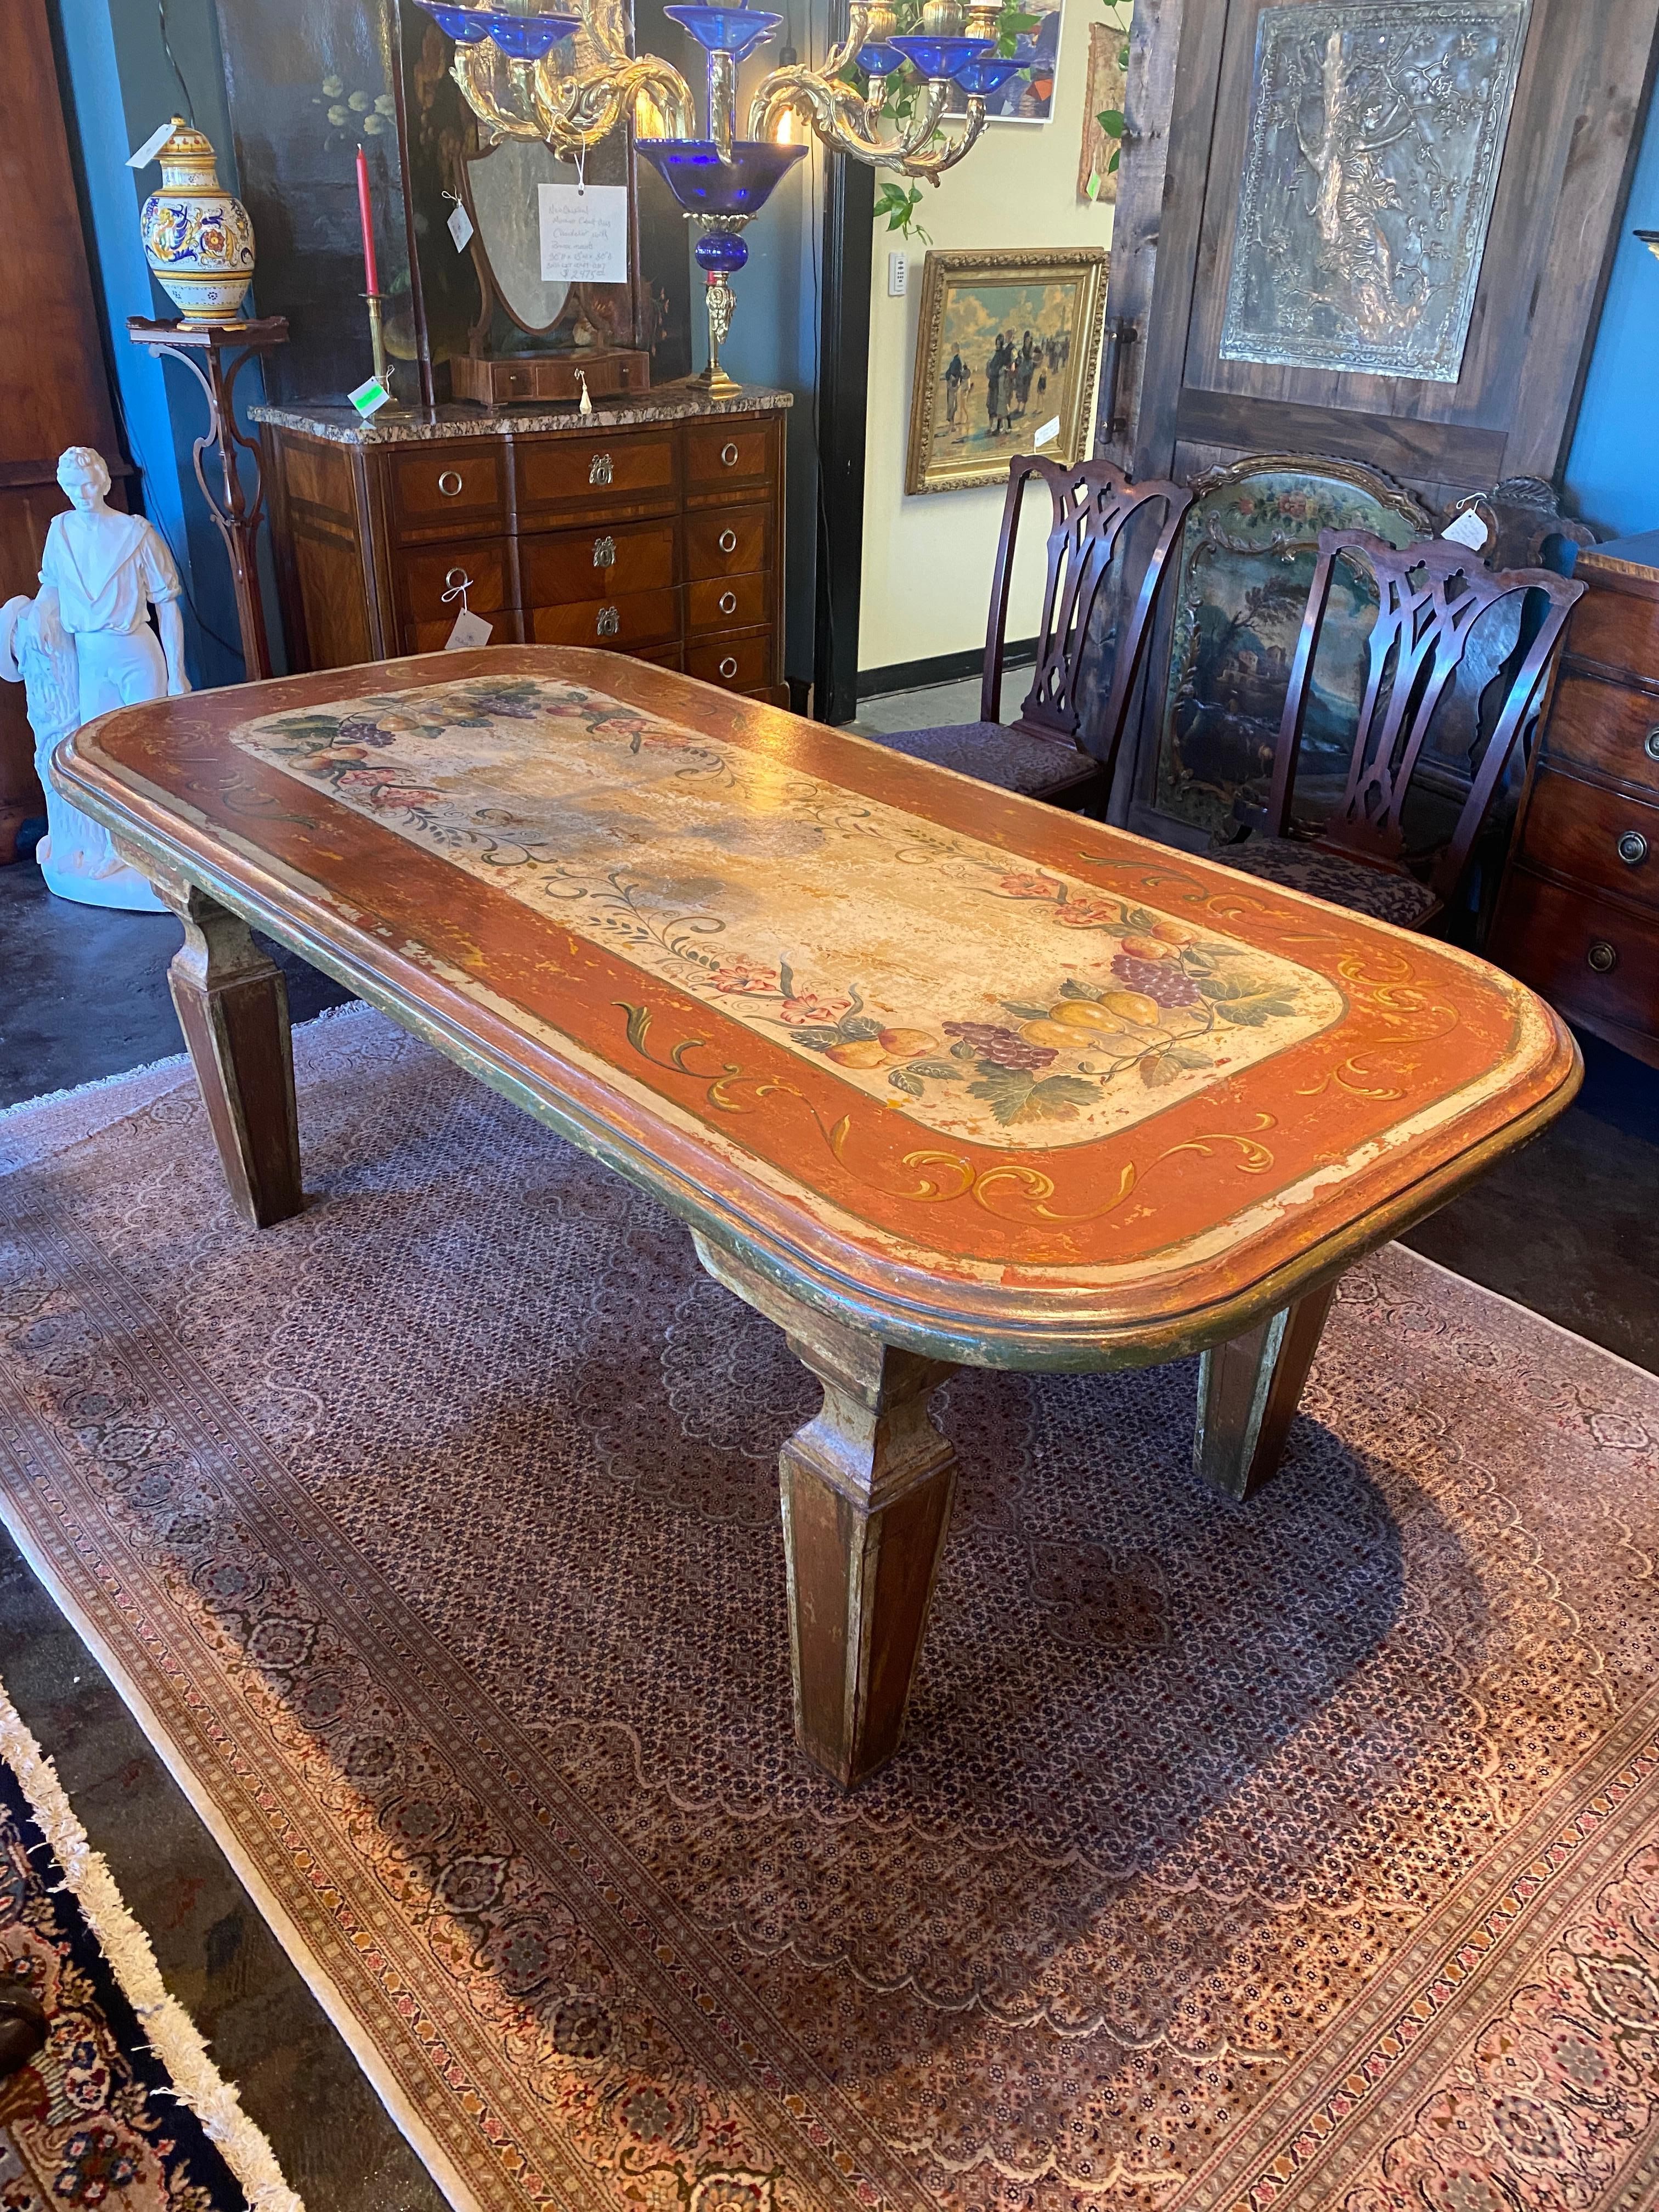 Large one piece top mid-century Italian hand painted table. Good patina on the surface, Hand painted scroll, grape and pear design. Four large removable legs.